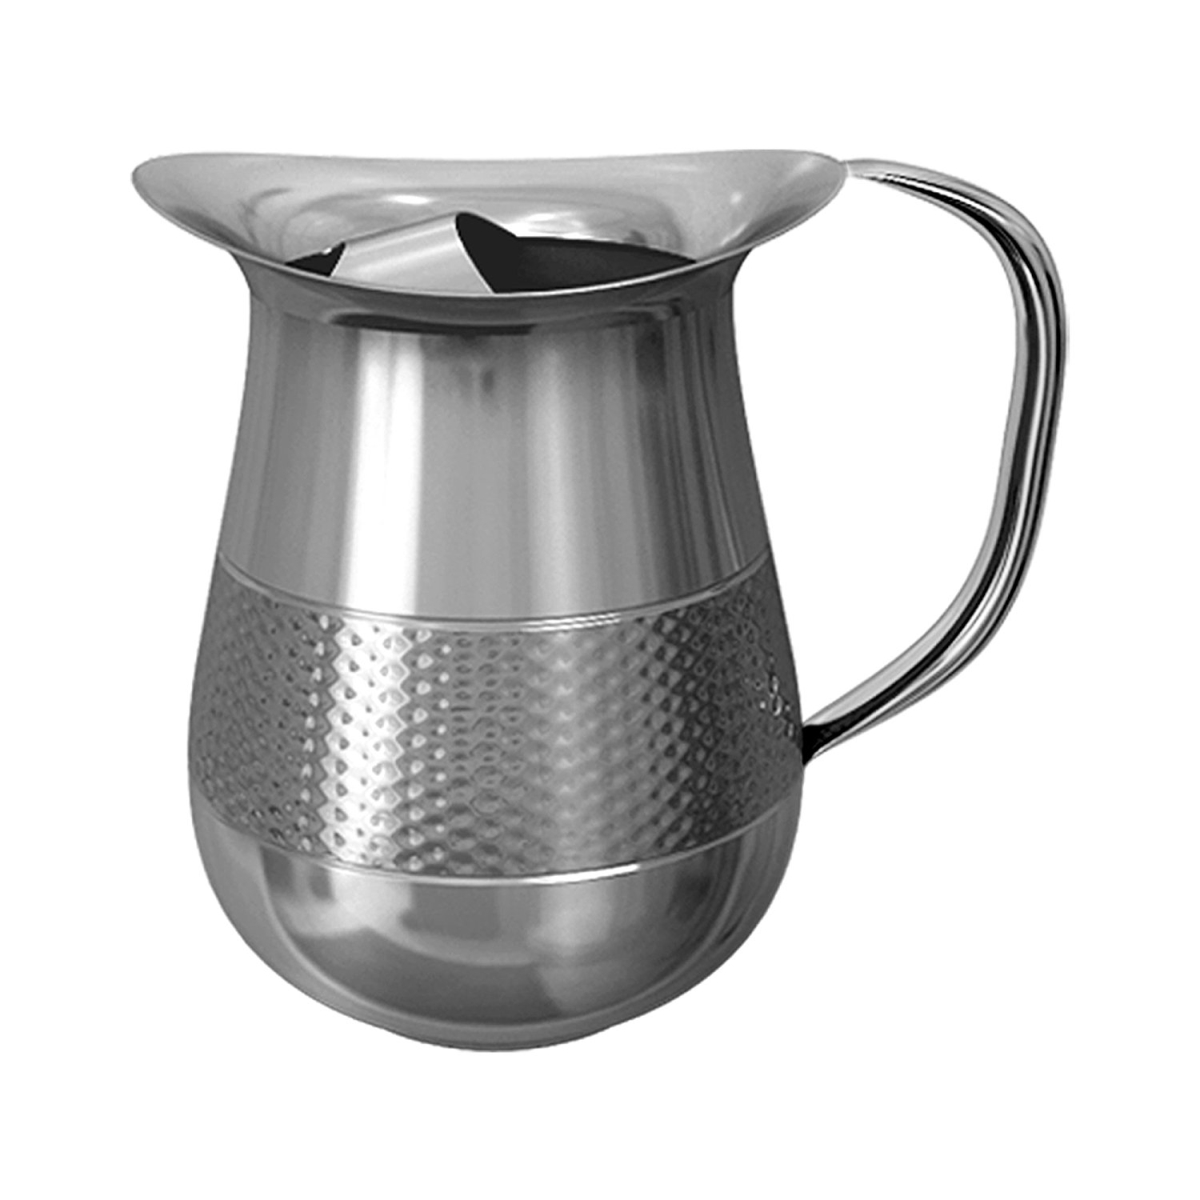 Tg-wp-1h-ic Hammered Water Pitcher 1.5 Ltr. Polished